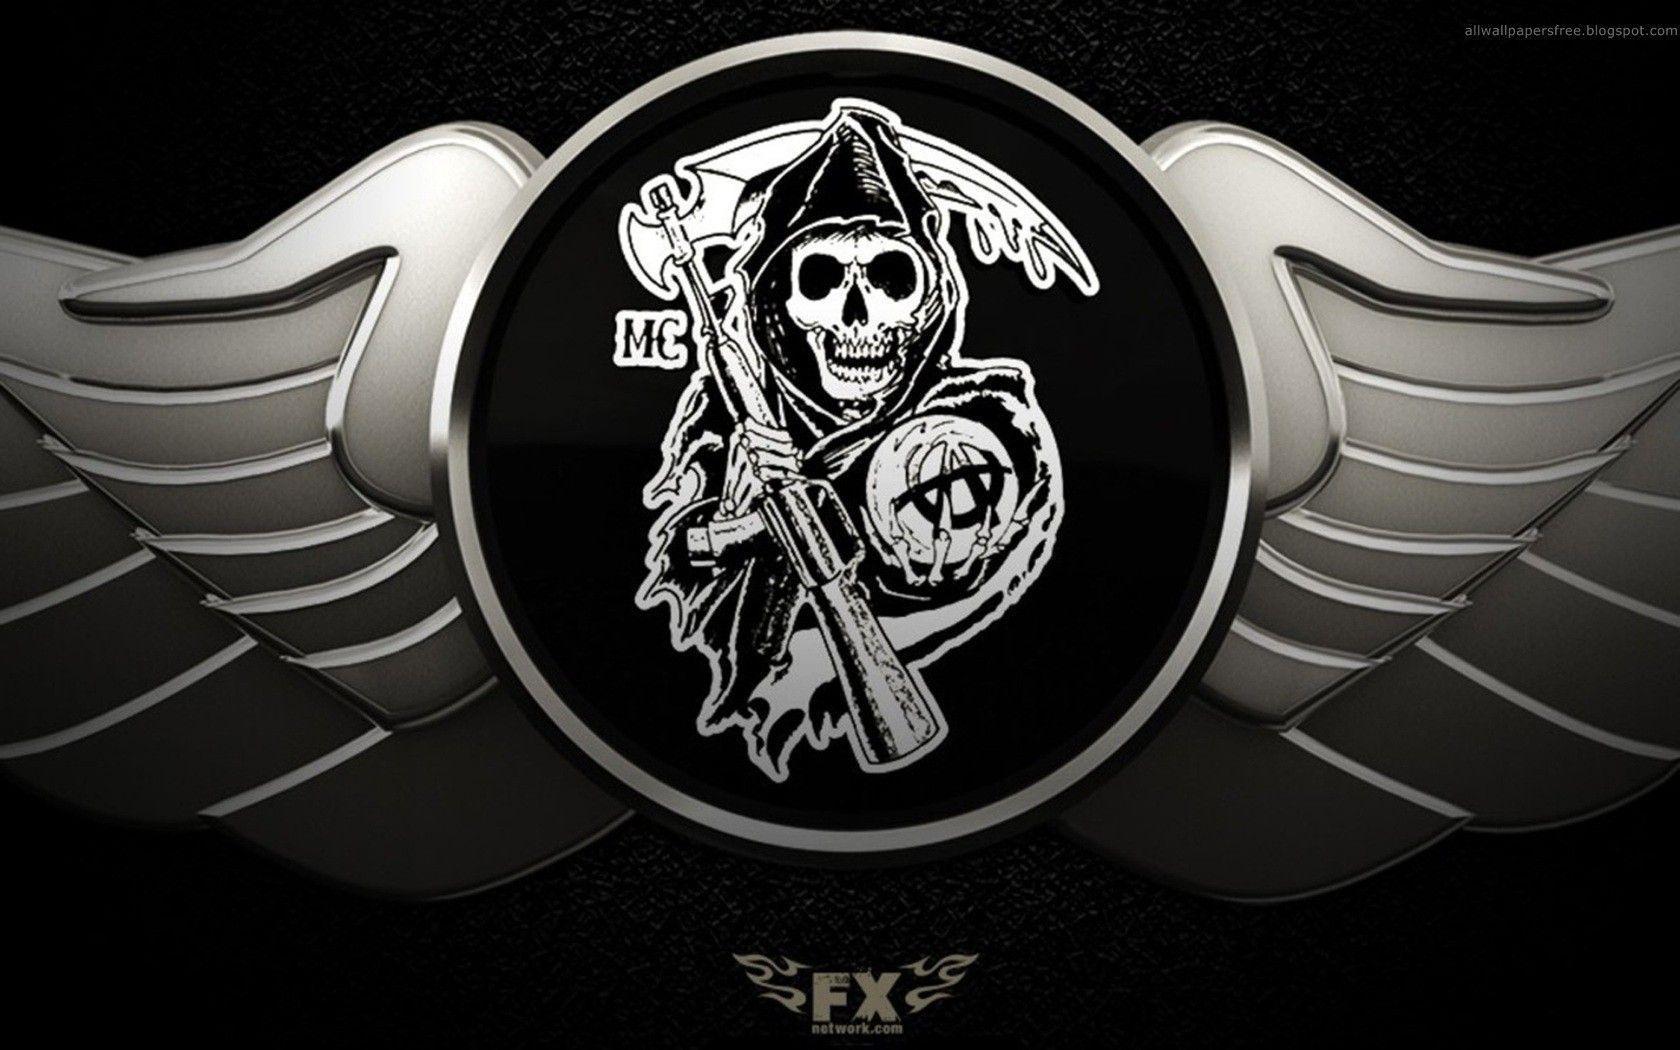 Sons Of Anarchy wallpaper by huseyinseyhann - Download on ZEDGE™ | 5989